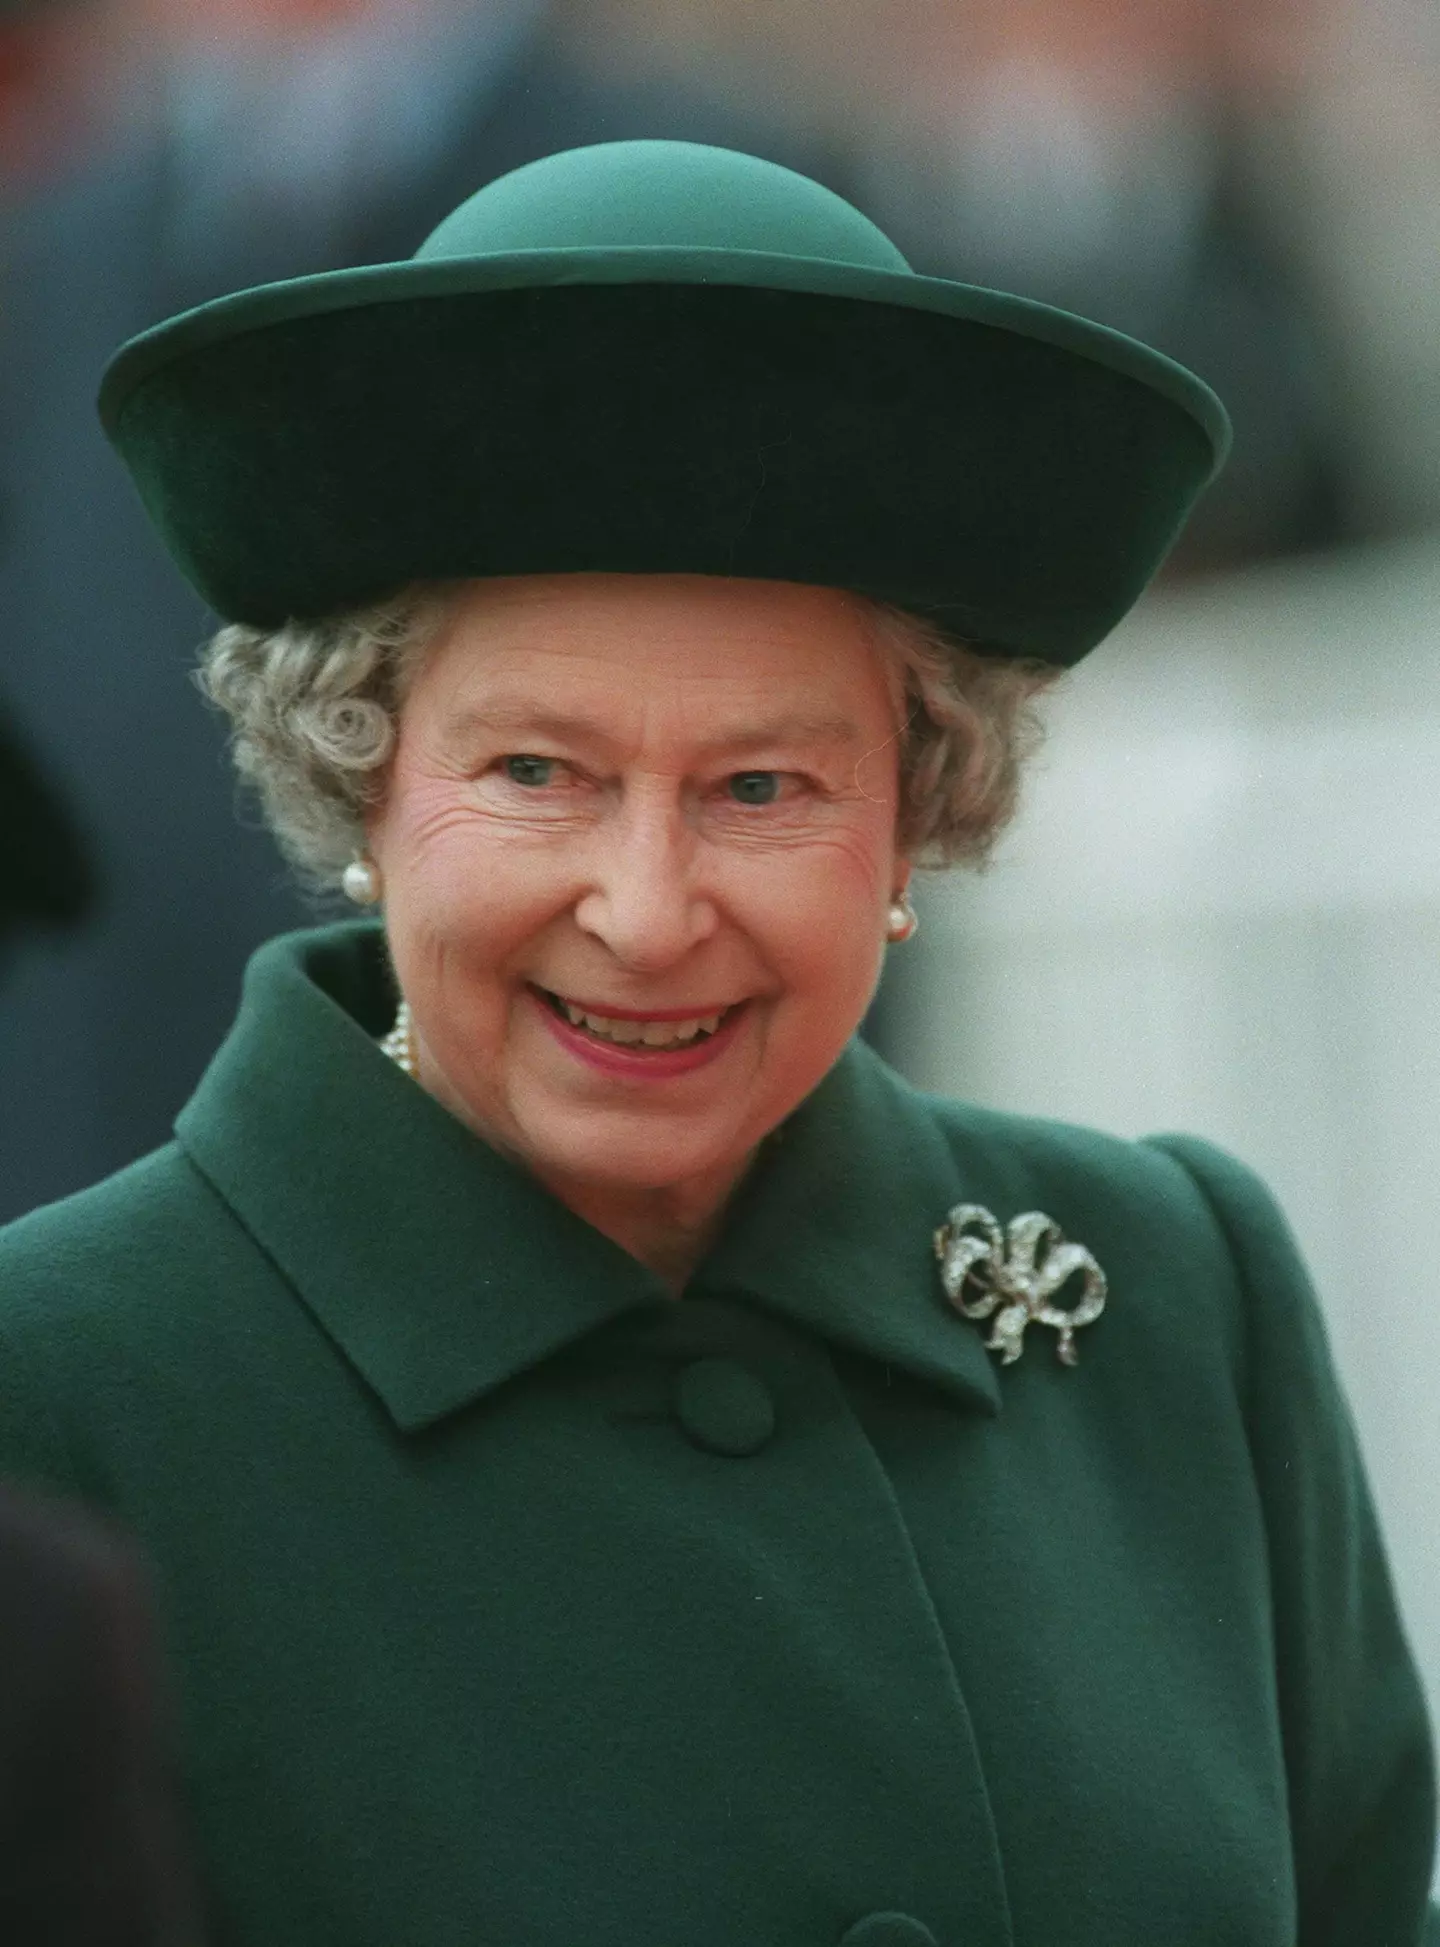 Her Majesty will be laid to rest in the King George VI Memorial Chapel at Windsor Castle.